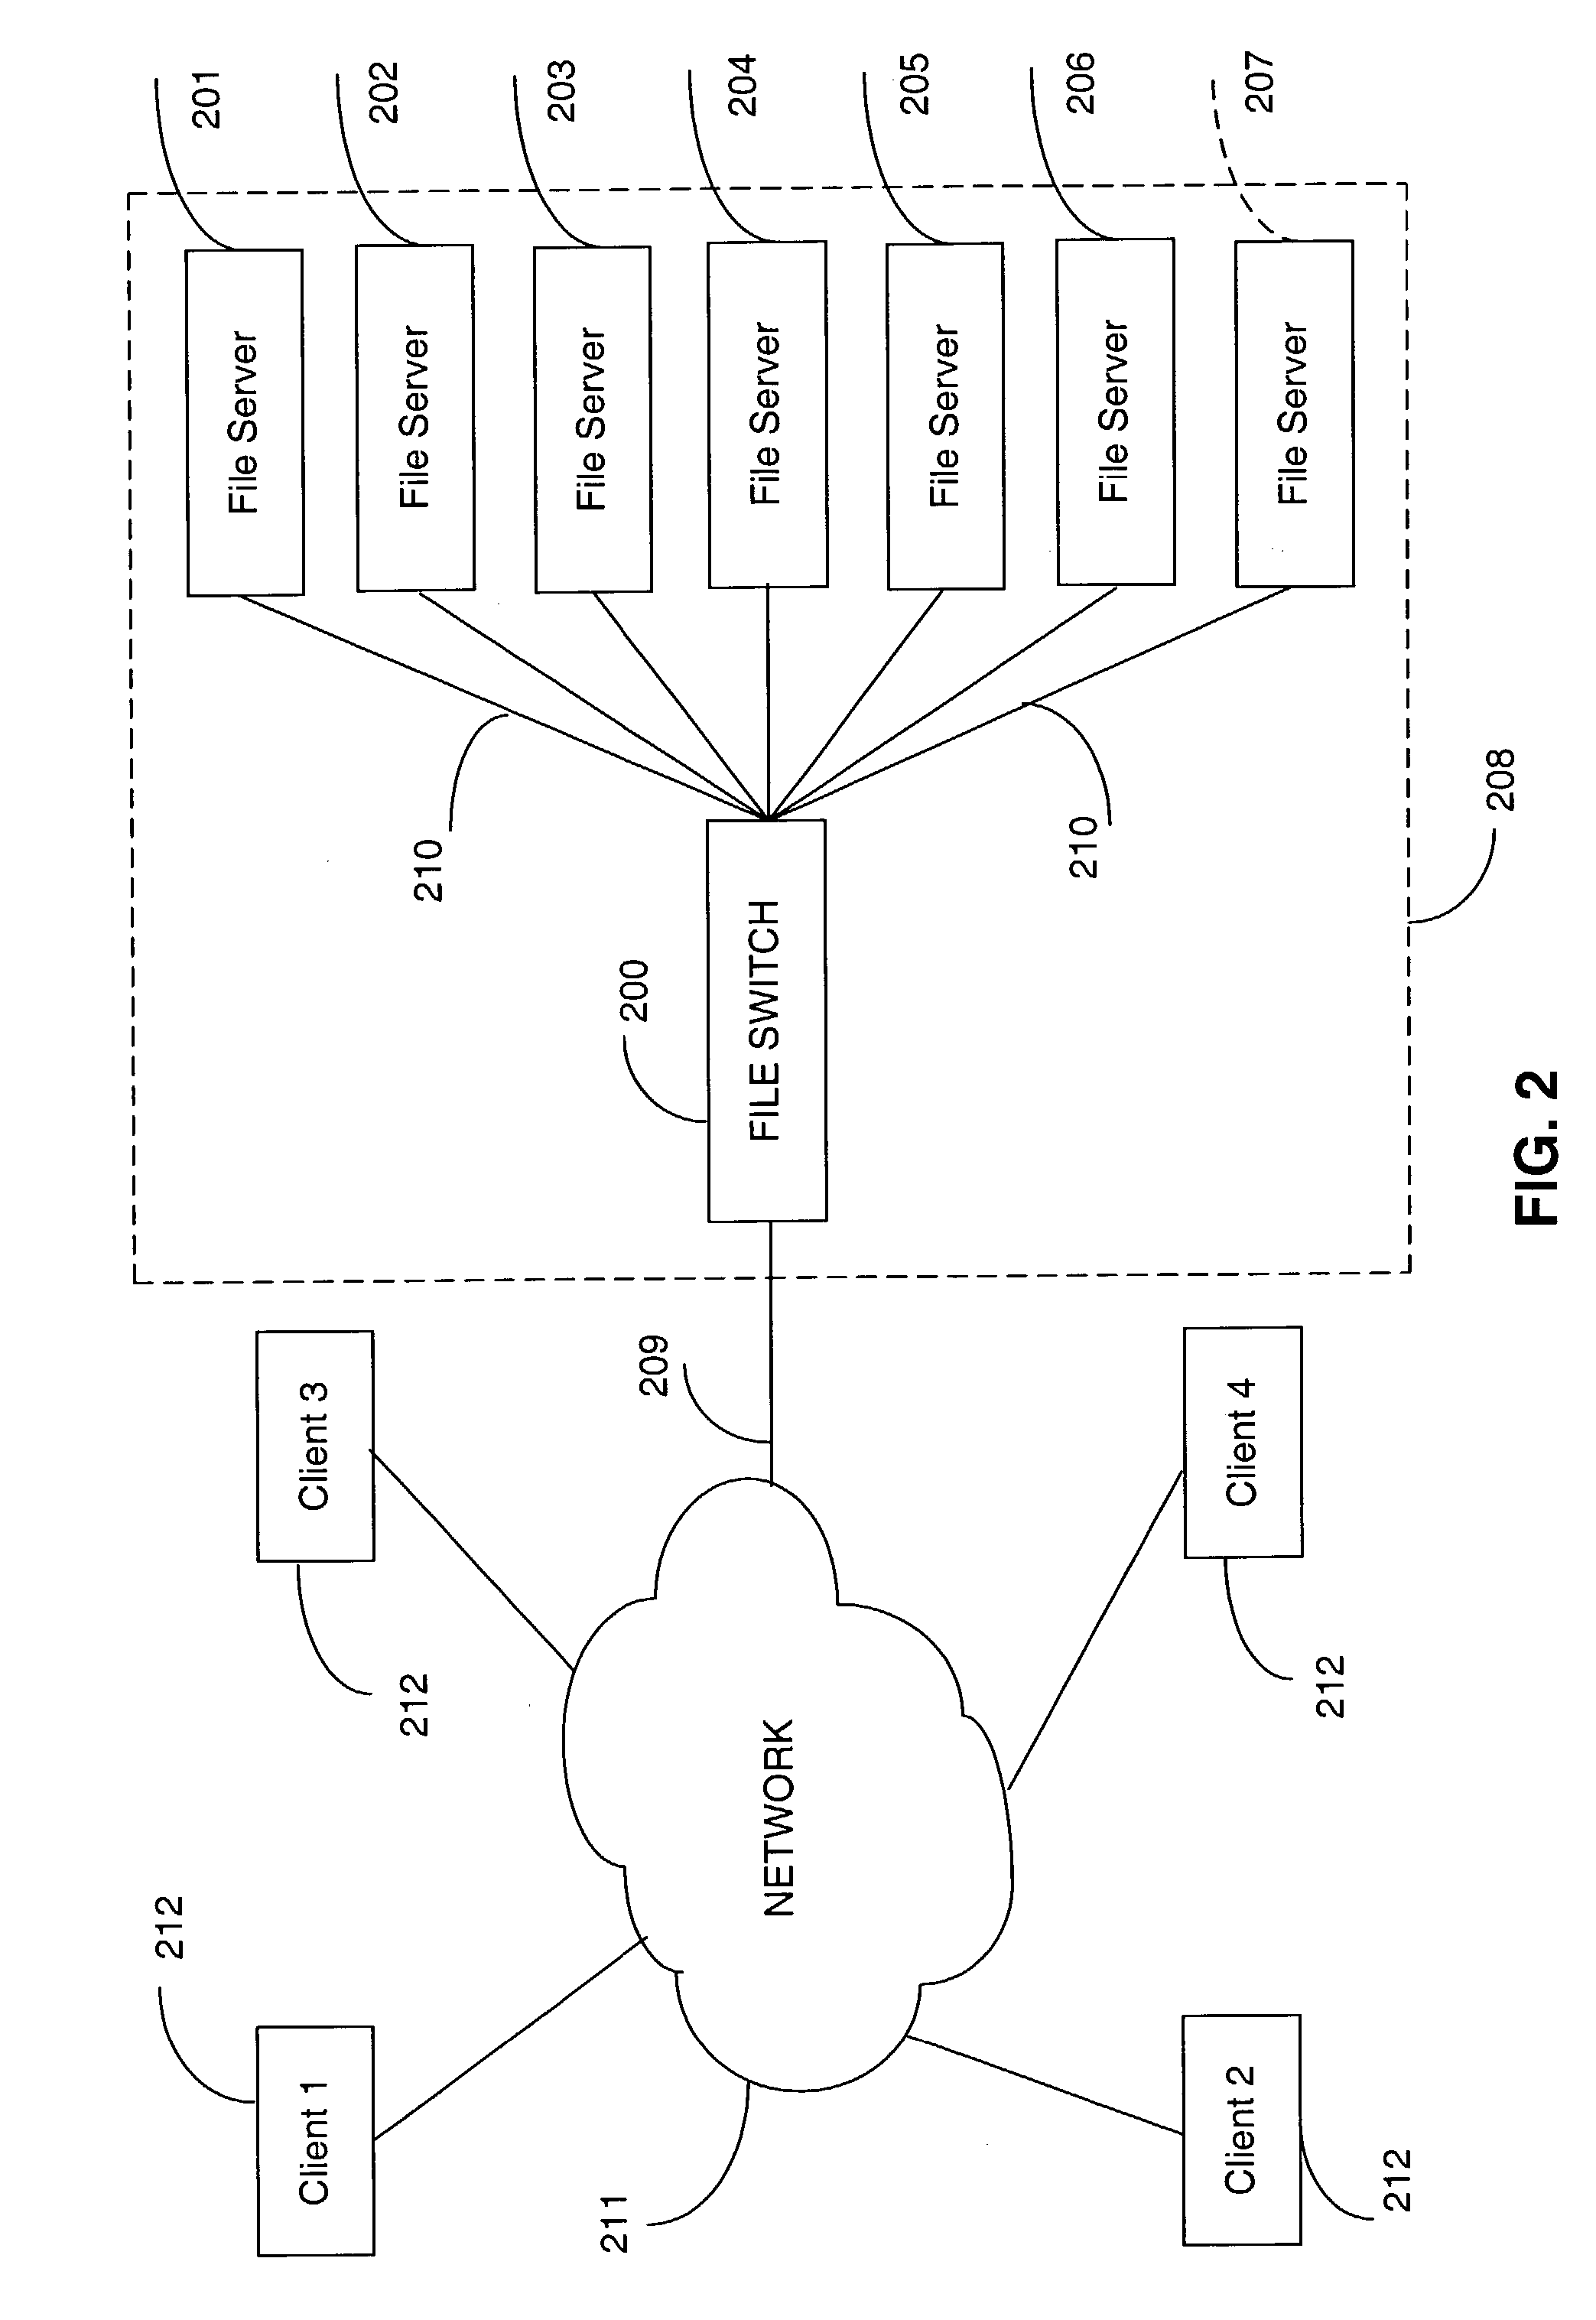 Aggregated lock management for locking aggregated files in a switched file system